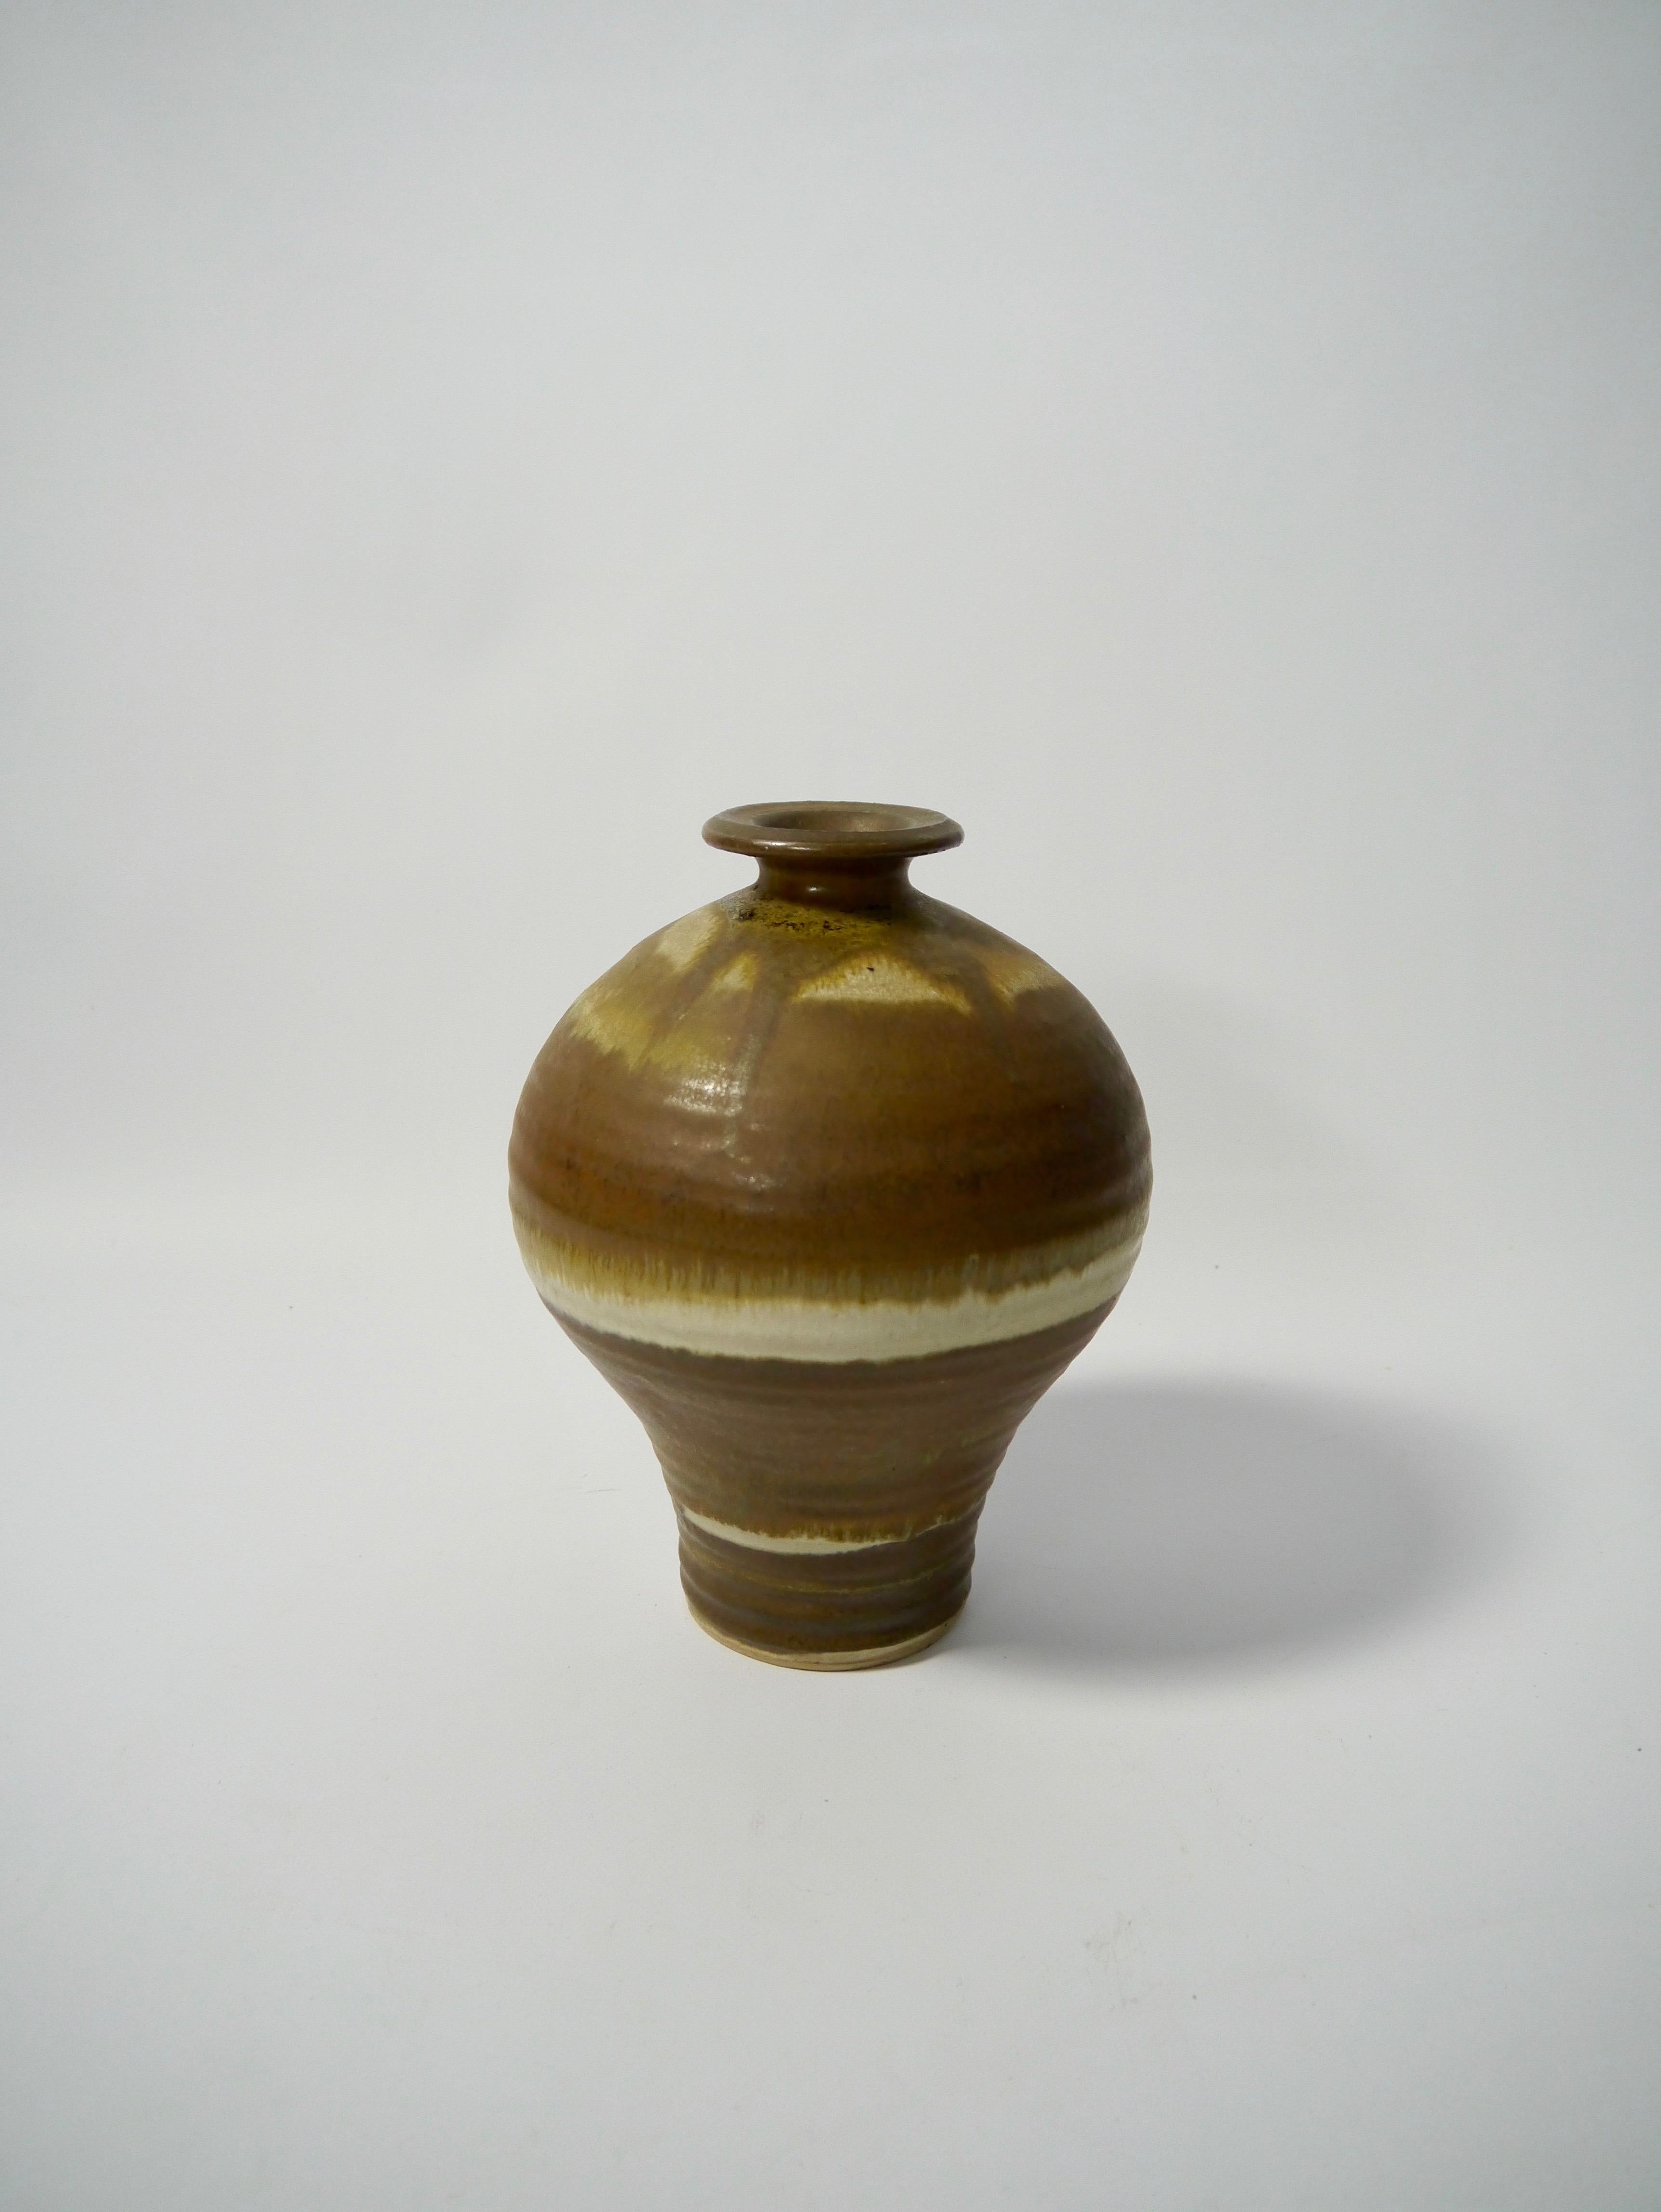 Hand thrown ceramic vase, classic style shape, earth toned wabi-sabi glaze. Unknown maker, see stamp at base.